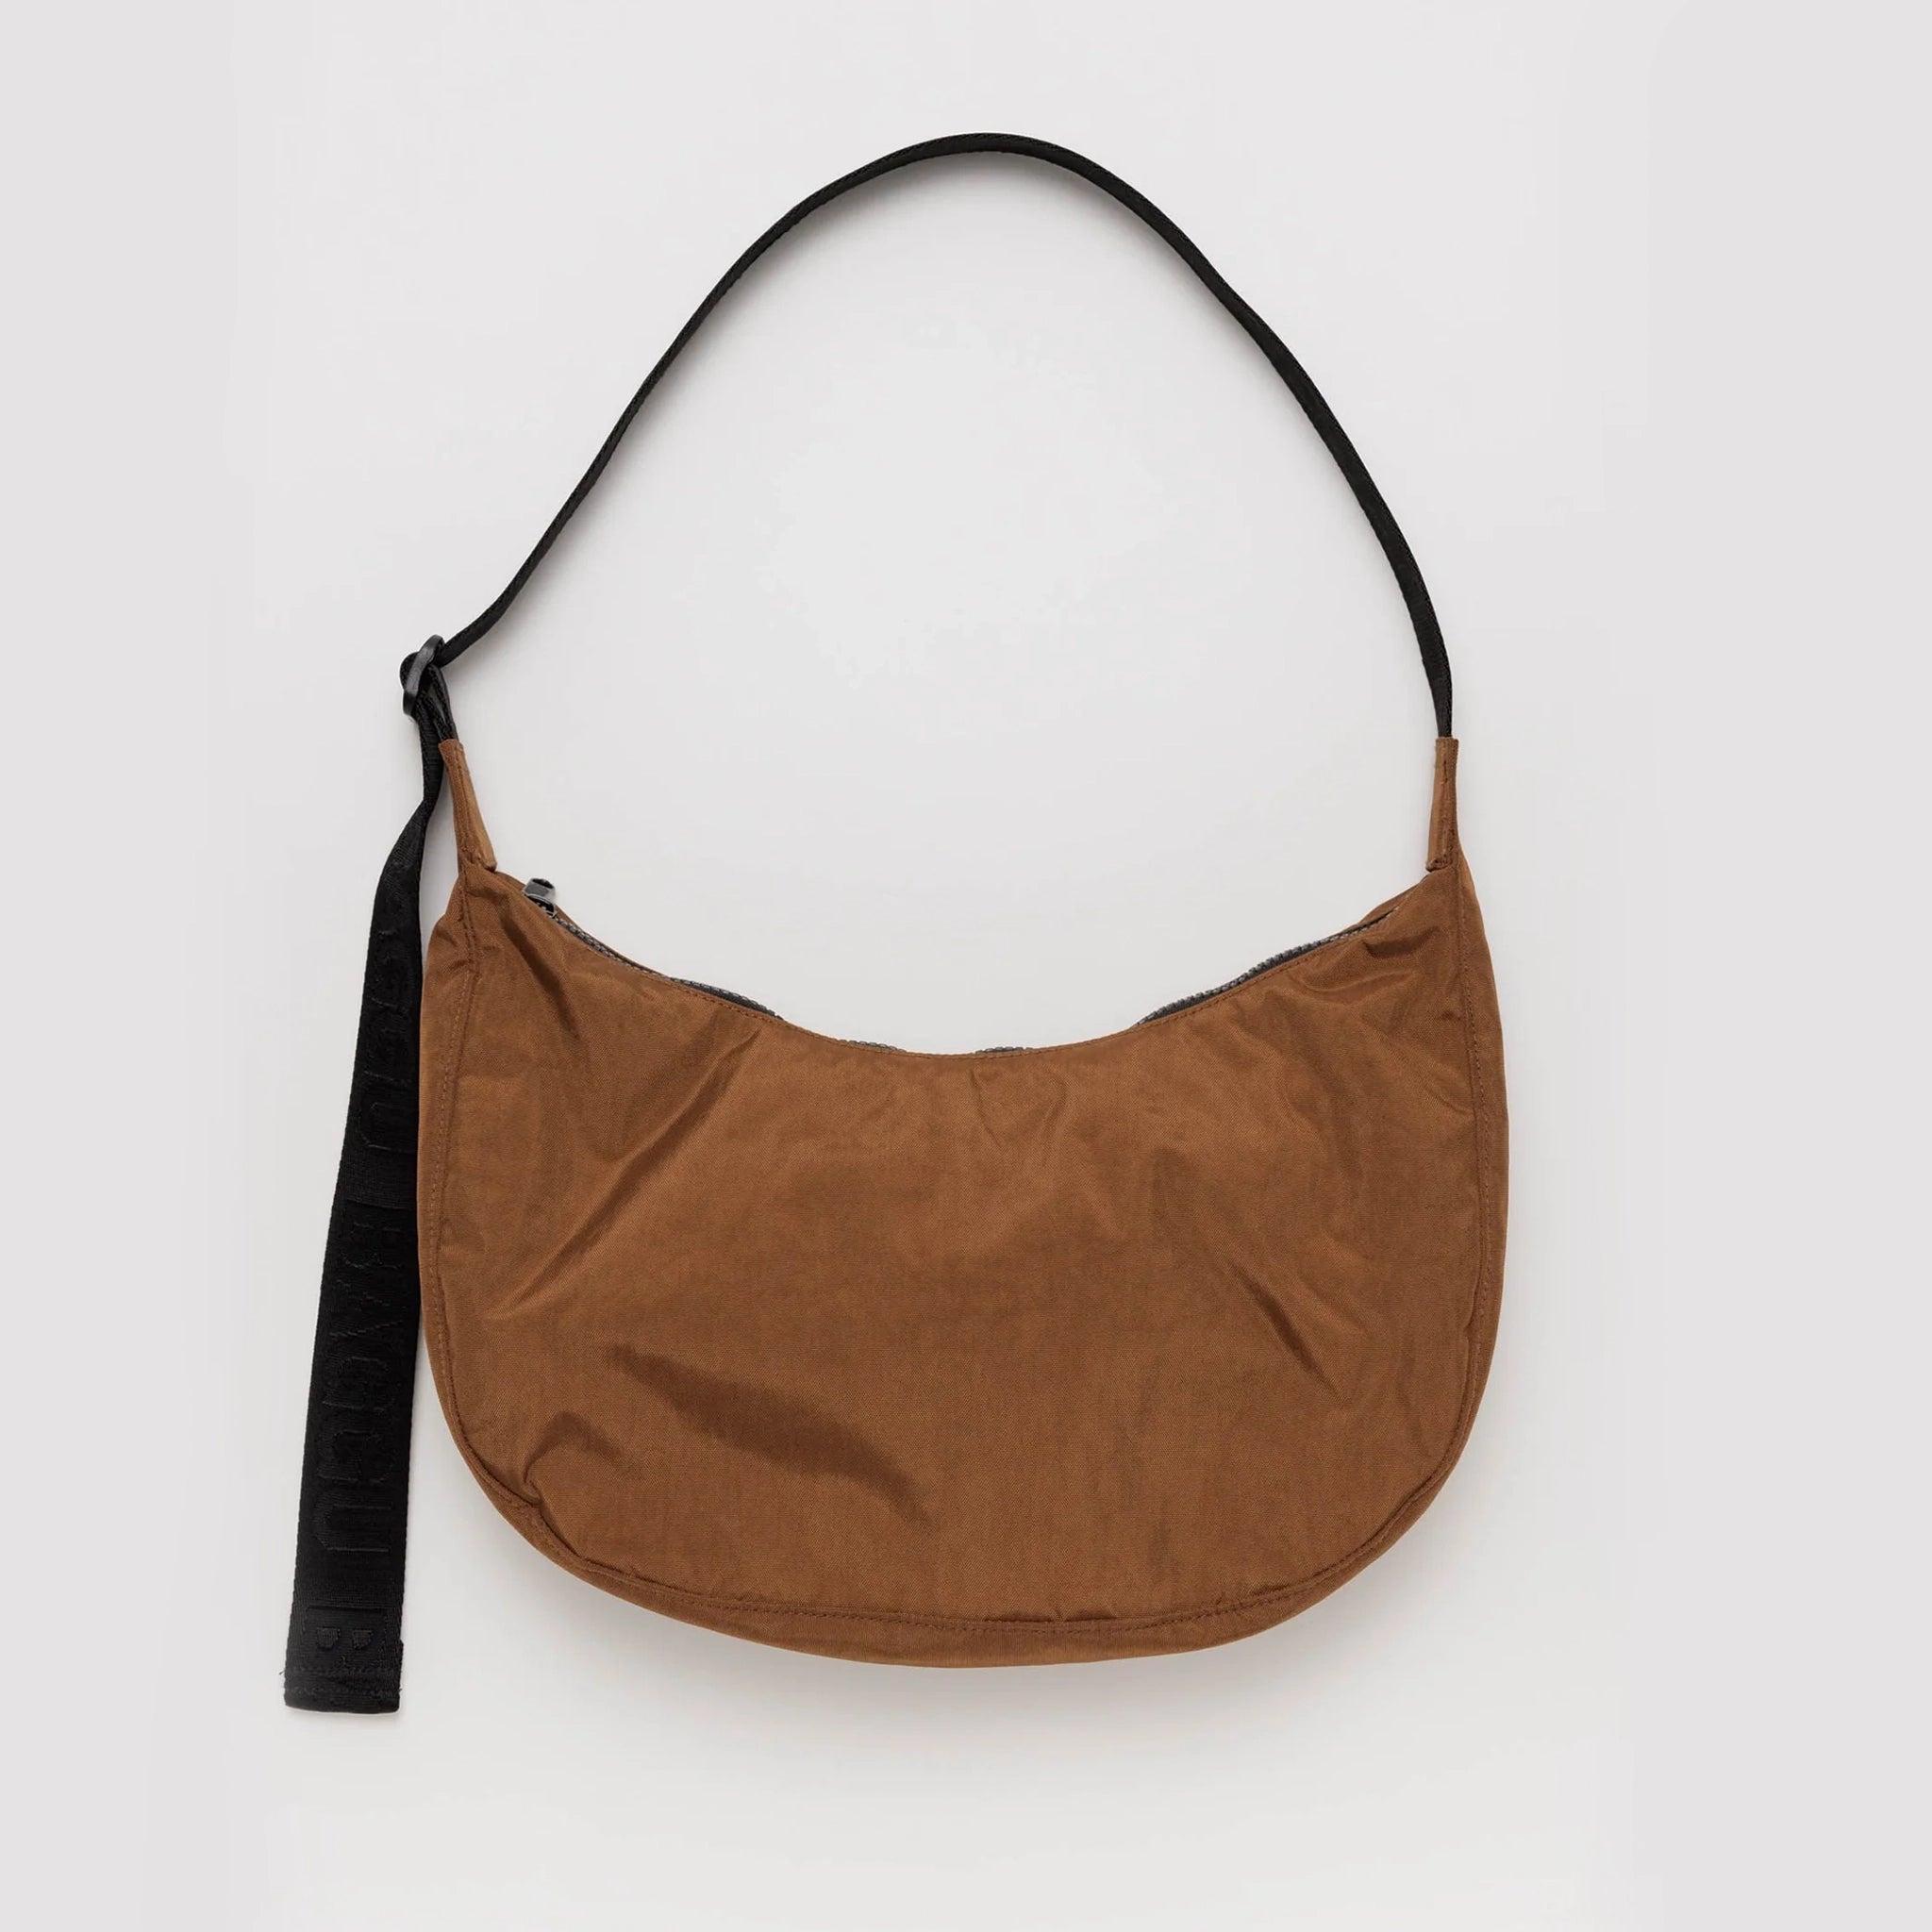 On a white background is a brown nylon bag with a black adjustable strap. 